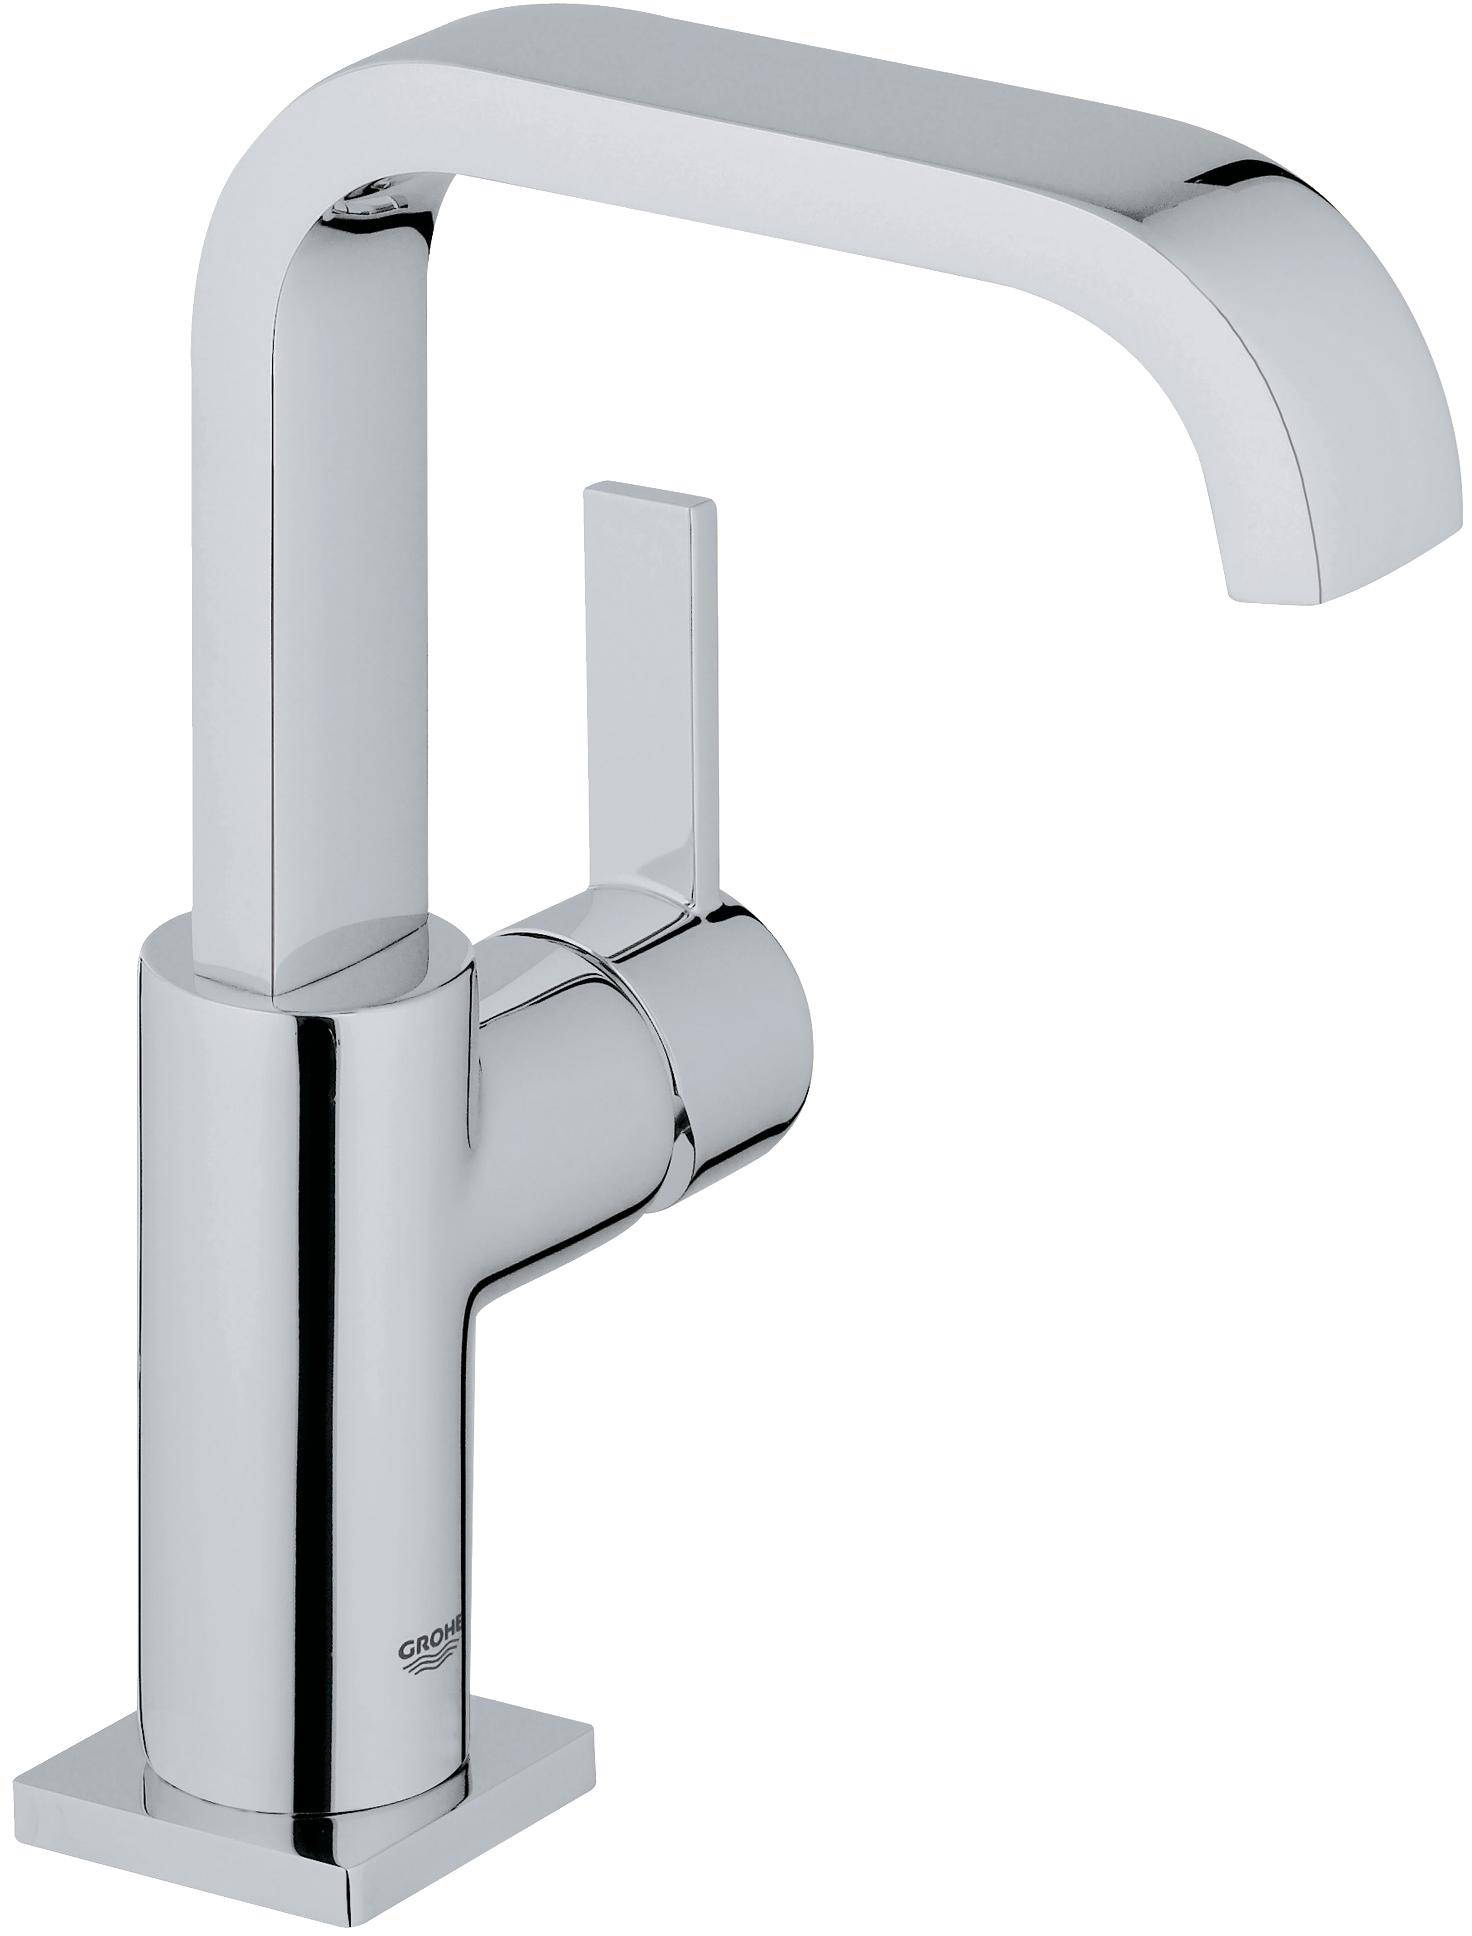 Grohe Allure 23076000